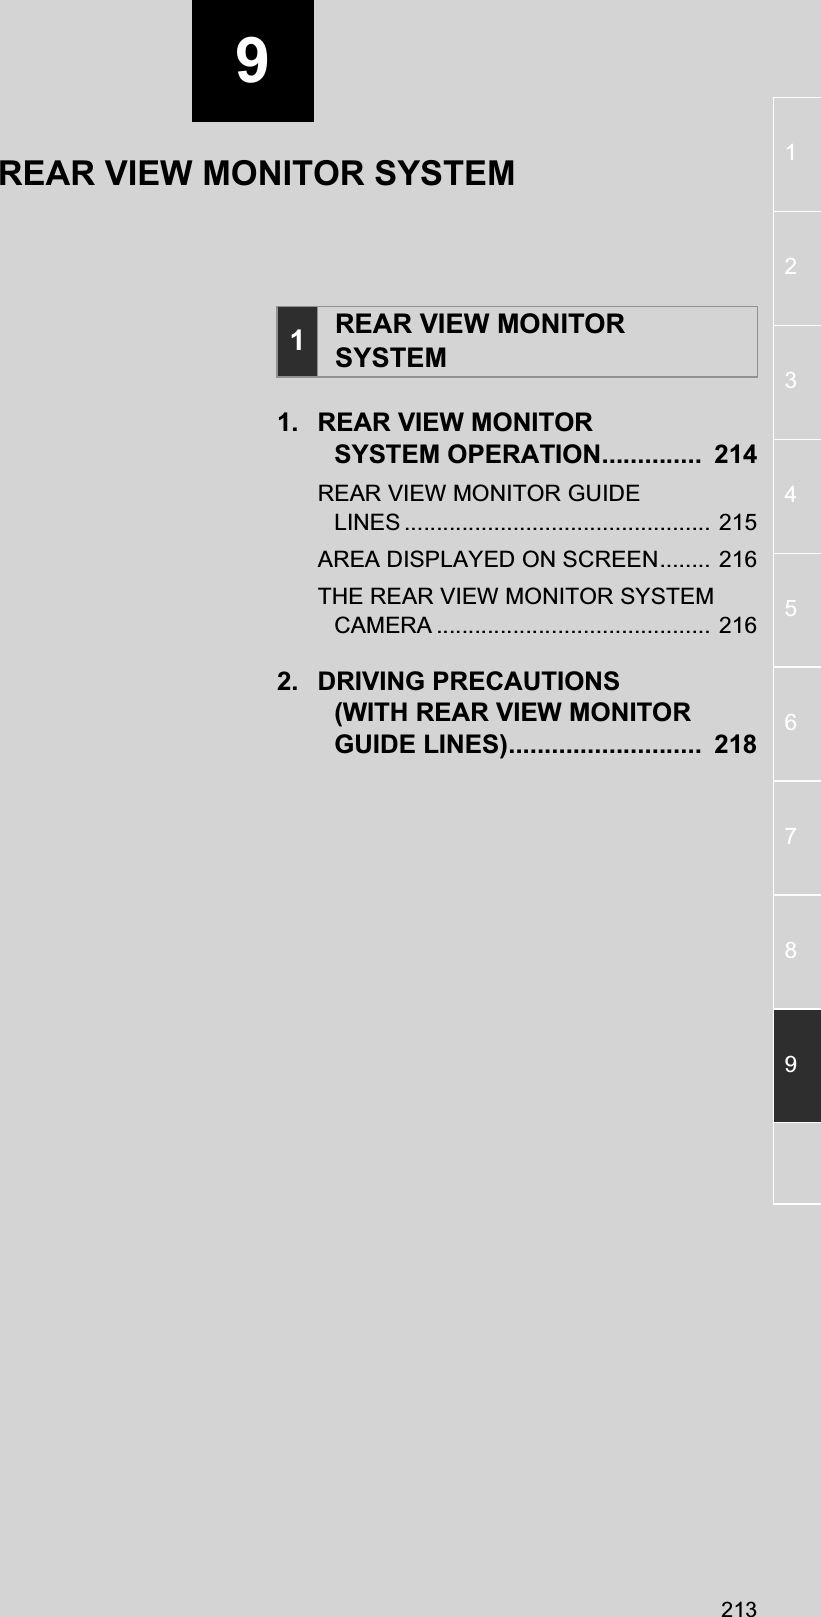 92131234567891. REAR VIEW MONITOR SYSTEM OPERATION..............  214REAR VIEW MONITOR GUIDE LINES................................................ 215AREA DISPLAYED ON SCREEN........ 216THE REAR VIEW MONITOR SYSTEM CAMERA ........................................... 2162. DRIVING PRECAUTIONS (WITH REAR VIEW MONITOR GUIDE LINES)...........................  2181REAR VIEW MONITOR SYSTEMREAR VIEW MONITOR SYSTEM